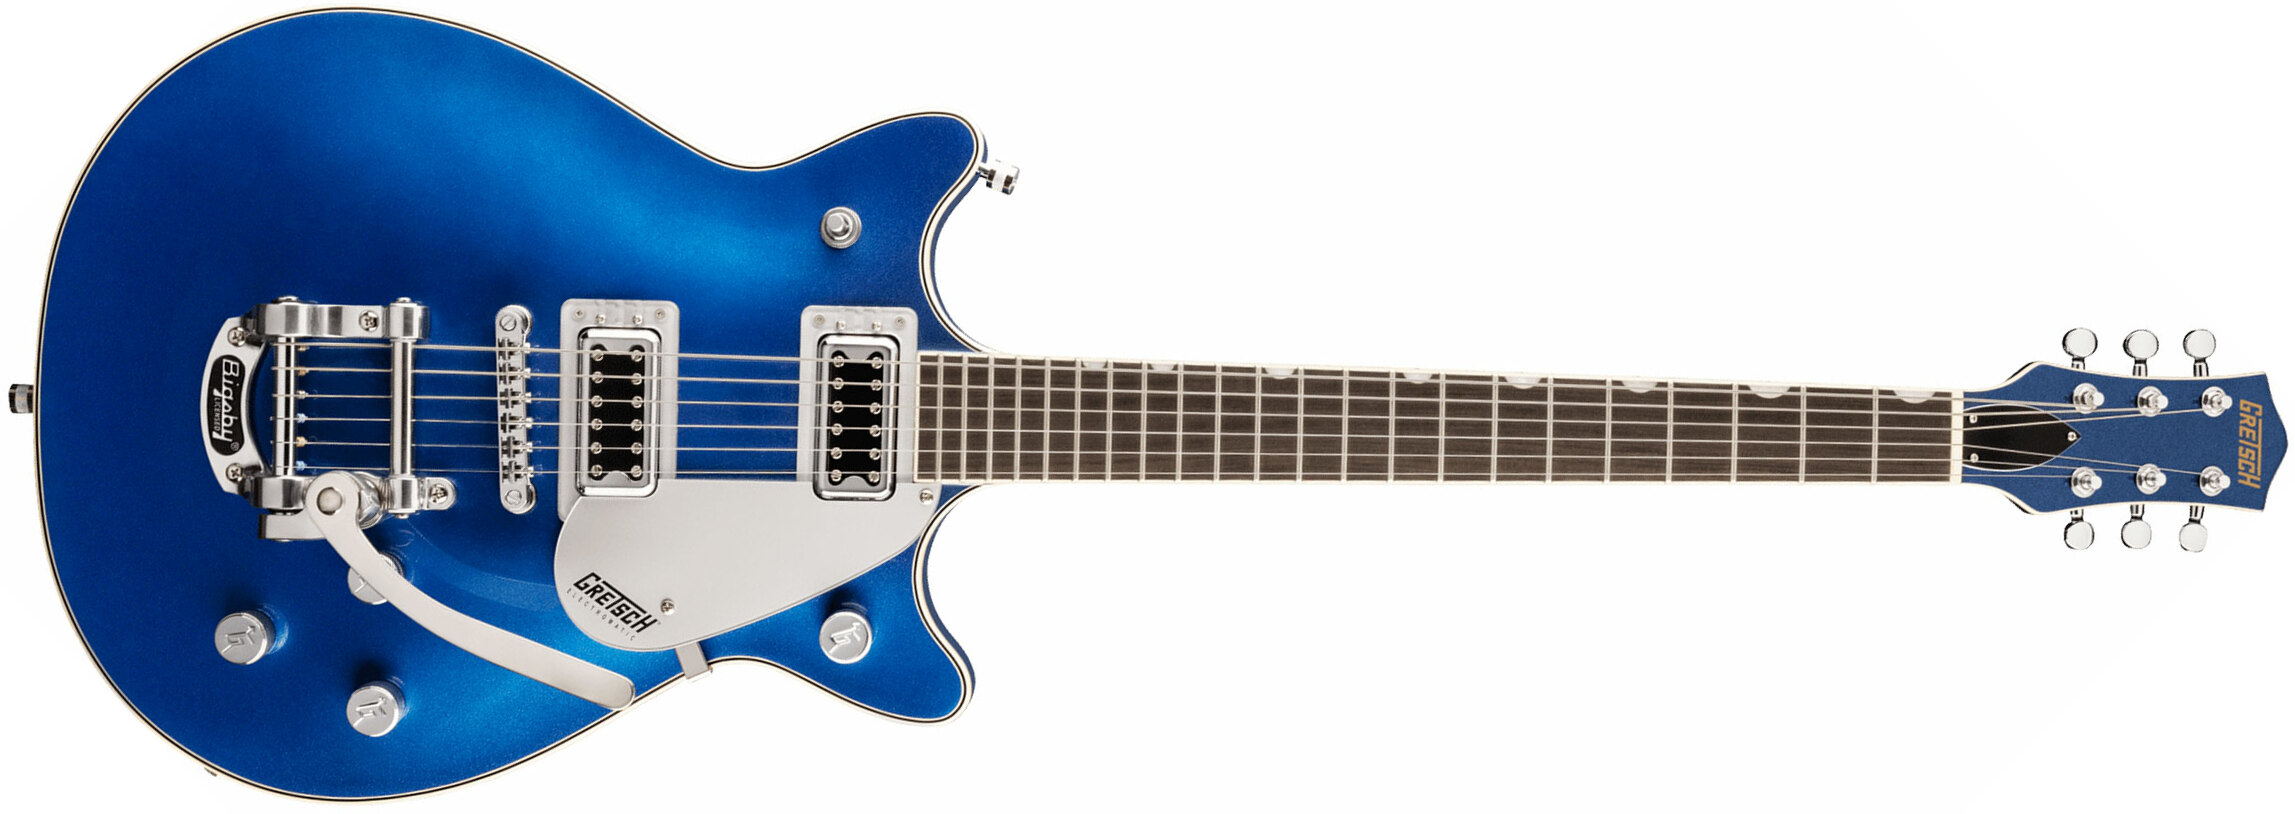 Gretsch G5232t Electromatic Double Jet Ft 2h Bigsby Lau - Fairlane Blue - Double cut electric guitar - Main picture